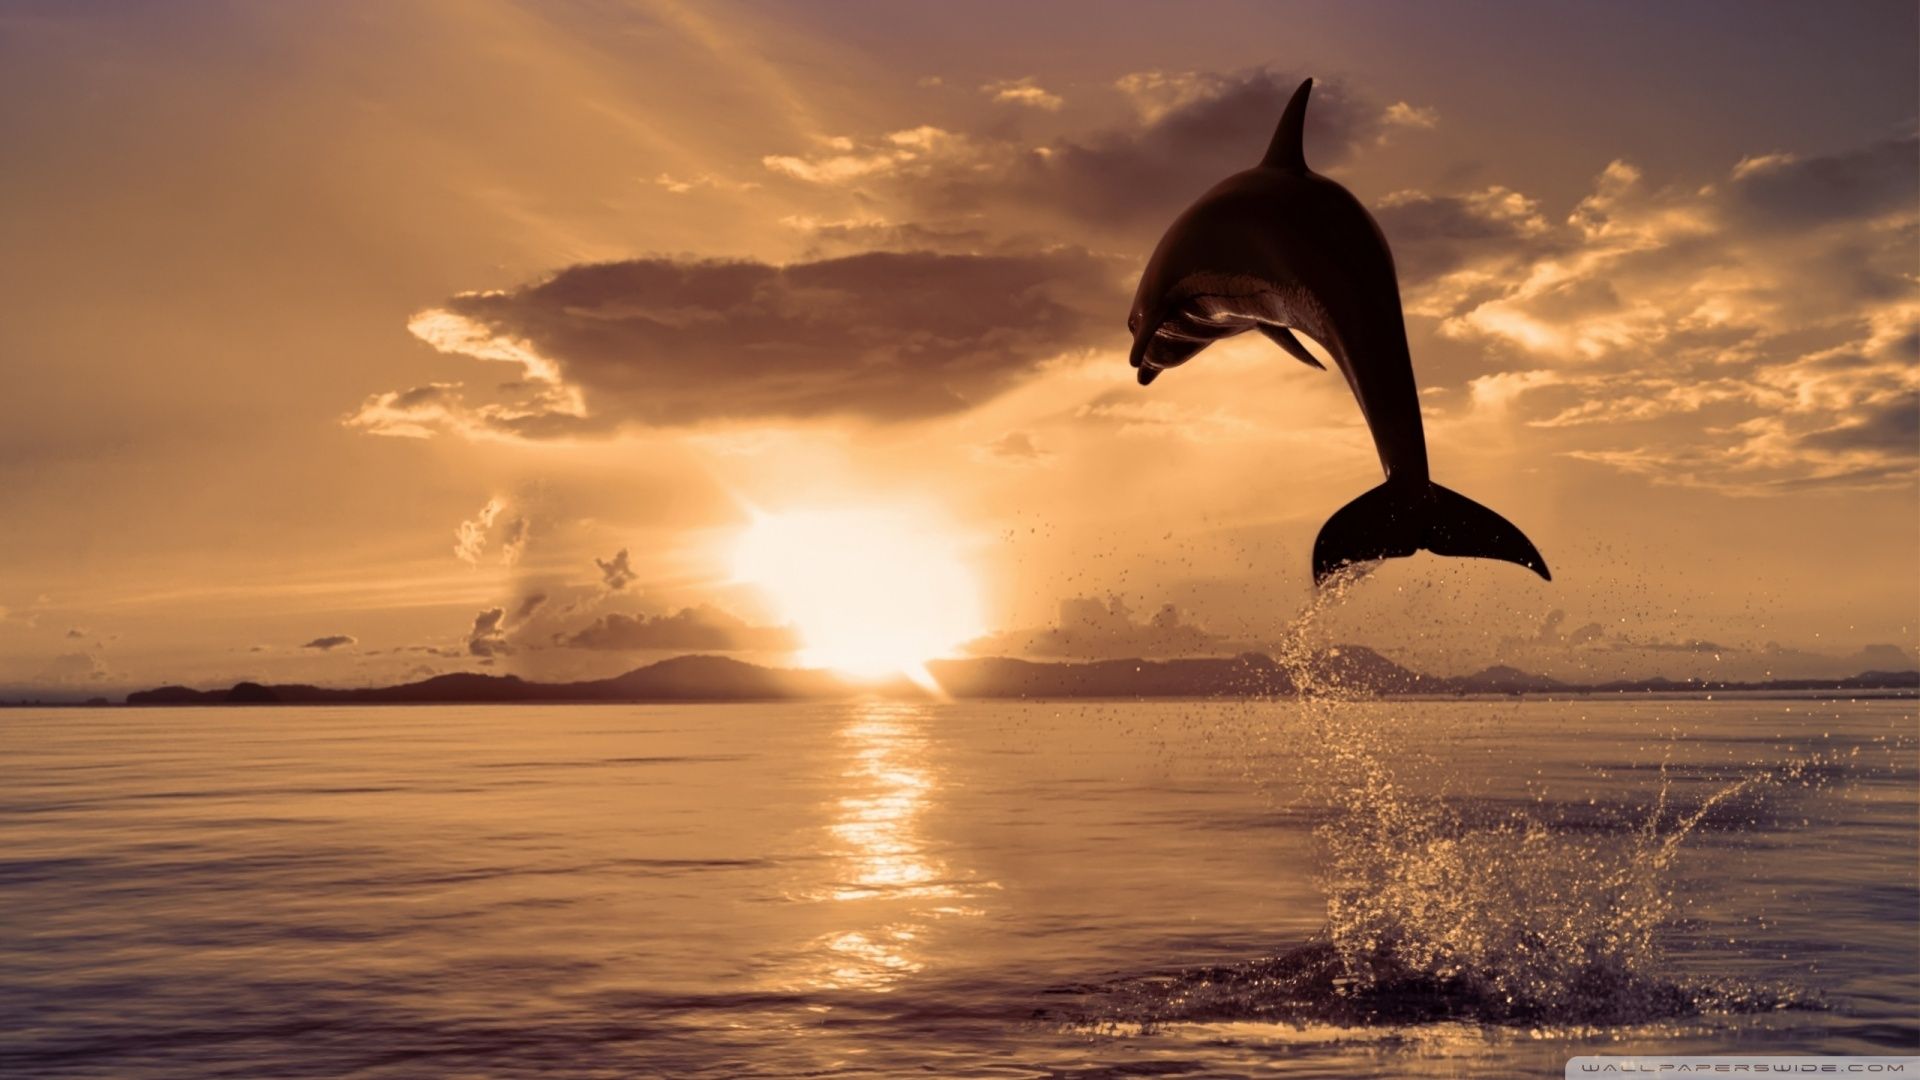 Dolphin Wallpapers Widescreen # 3XIIFNV - 4USkY